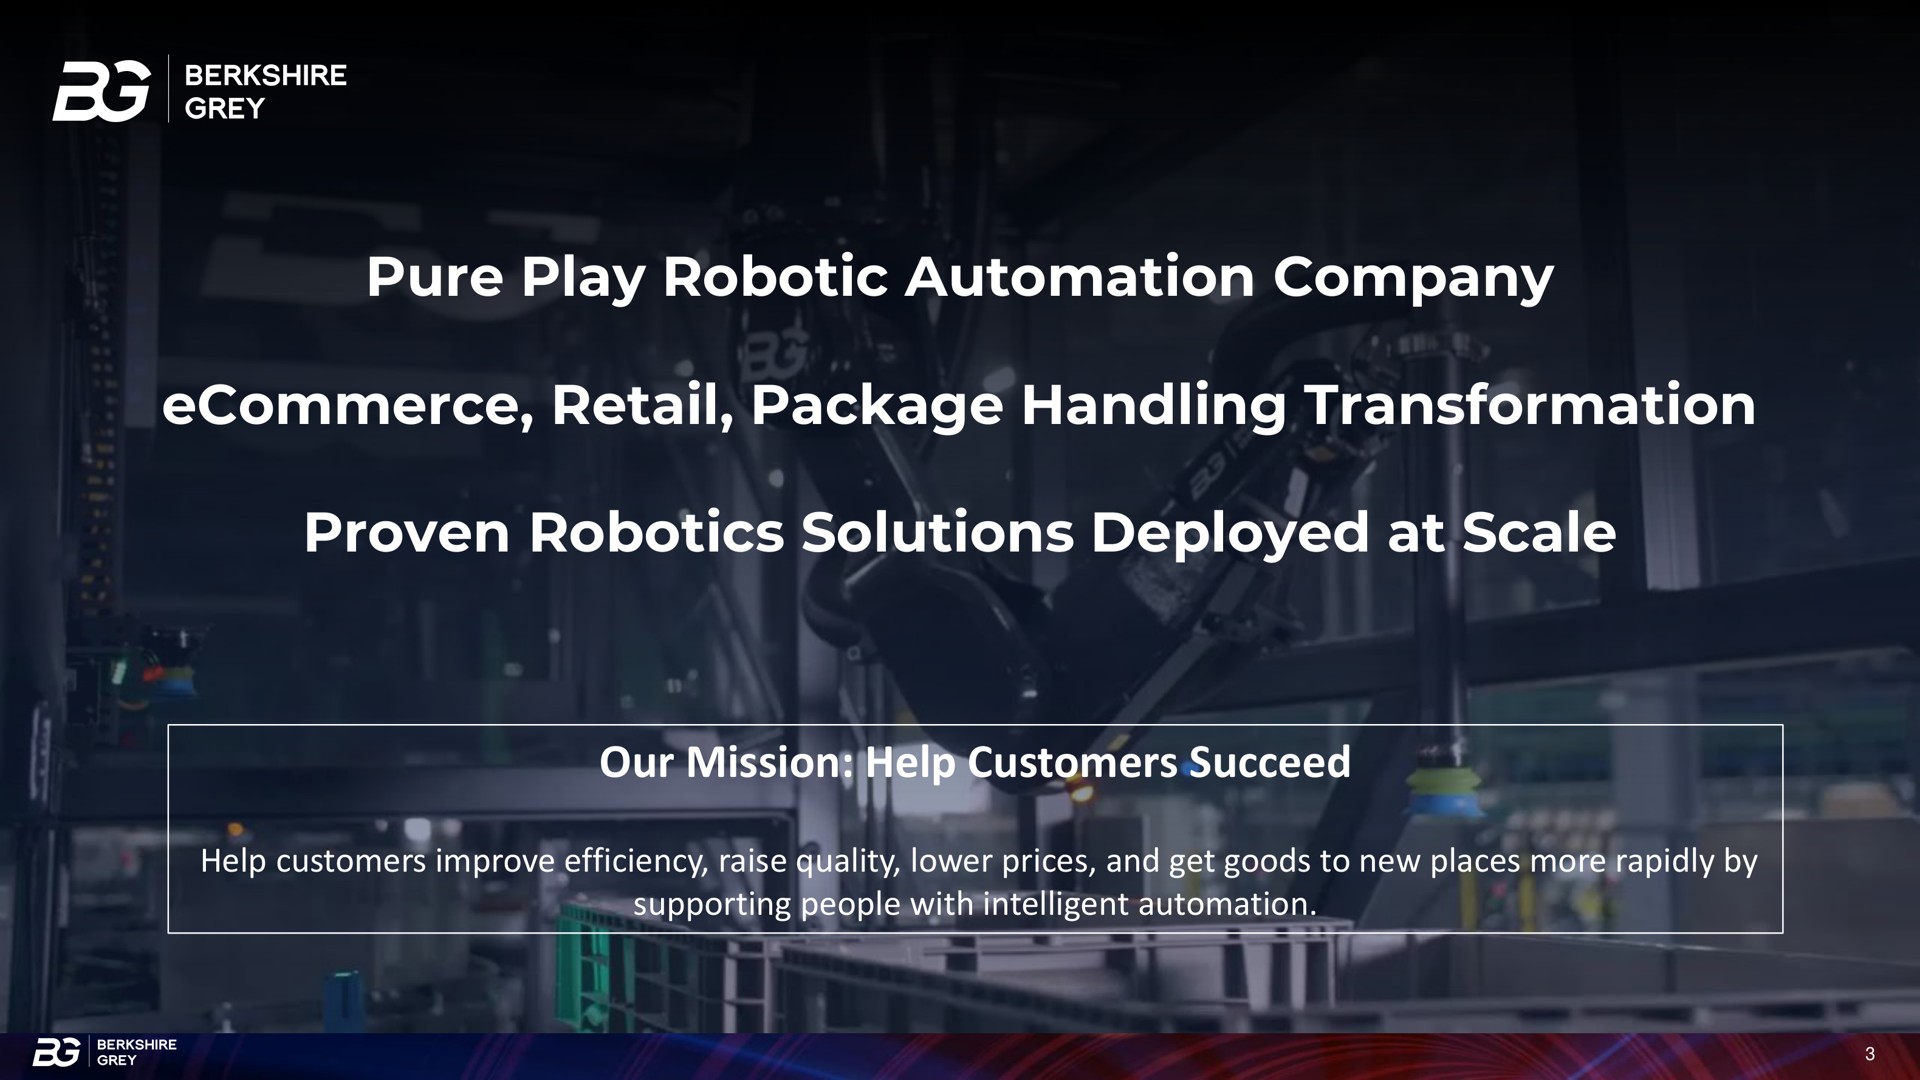 pure play company retail package handling transformation proven solutions deployed at scale our mission help customers succeed | Berkshire Grey